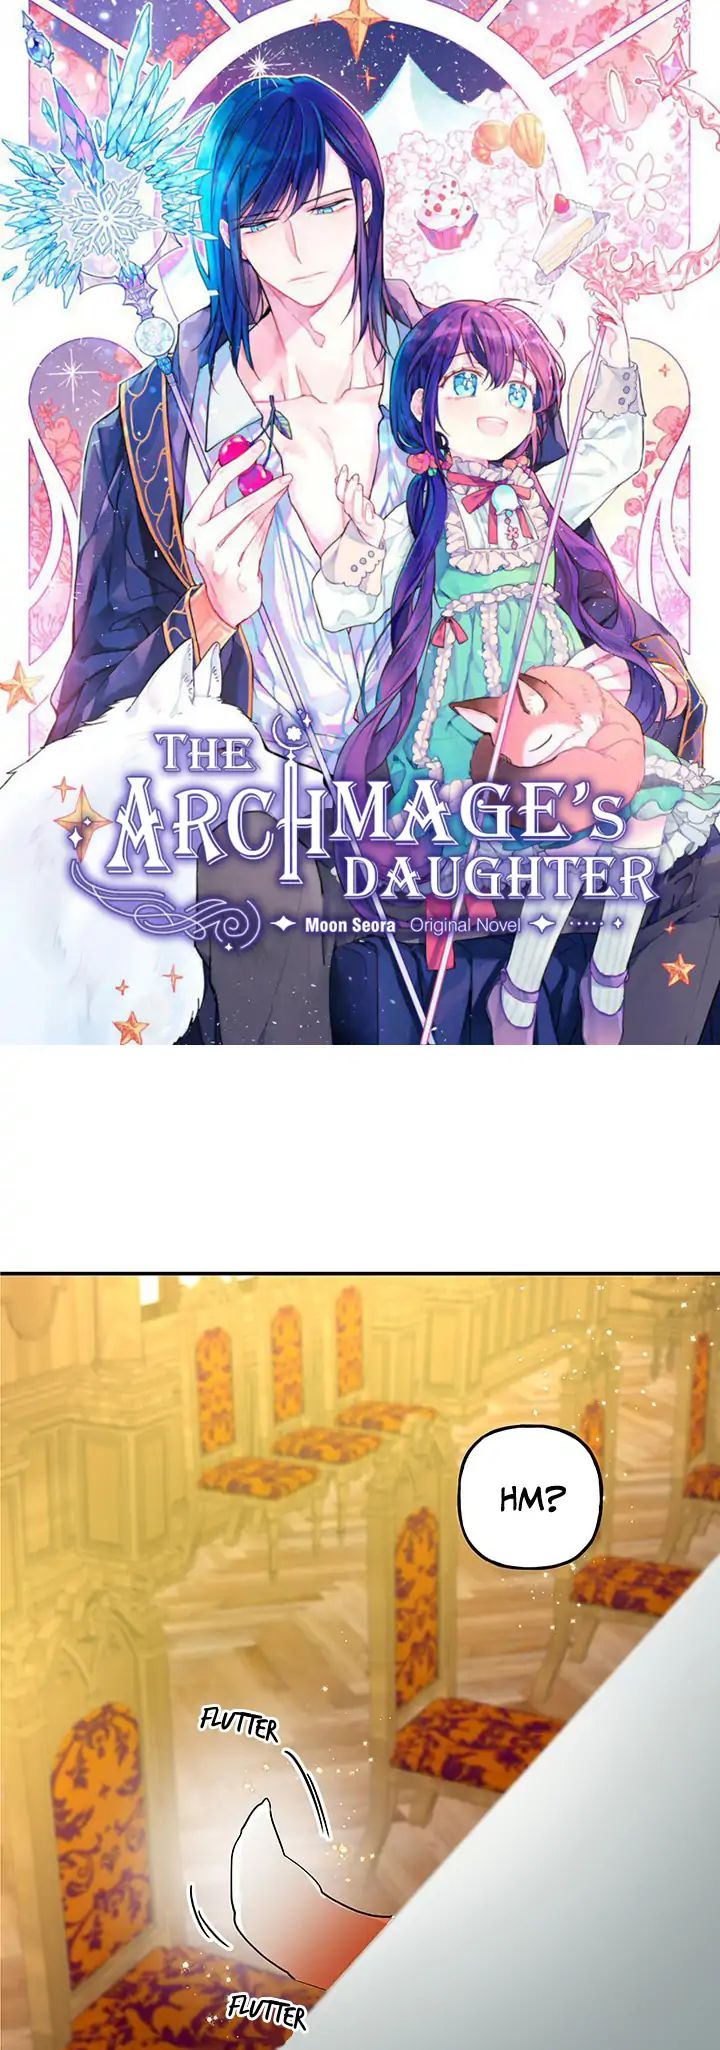 The Archmage’s Daughter chapter 5